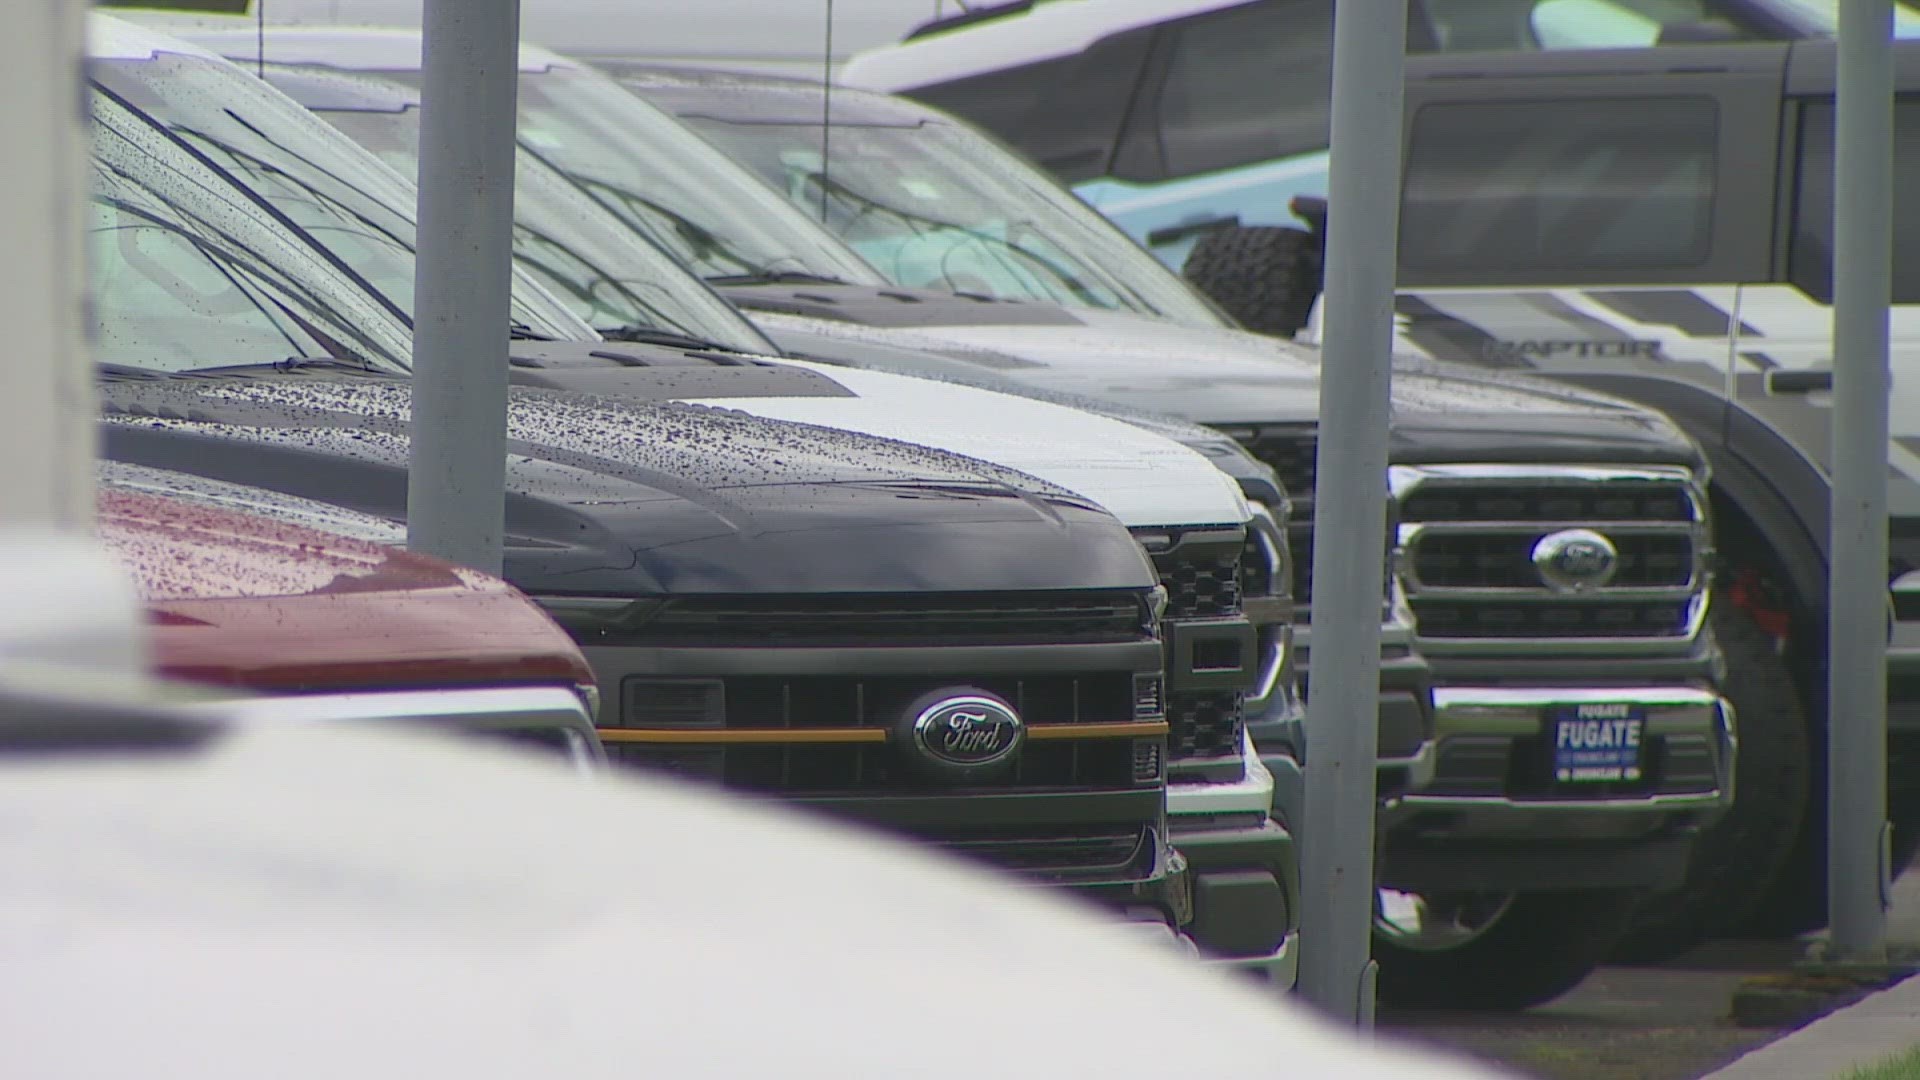 More than 24,000 vehicles have been reported stolen statewide so far this year, according to the Puget Sound Auto Theft Task Force.